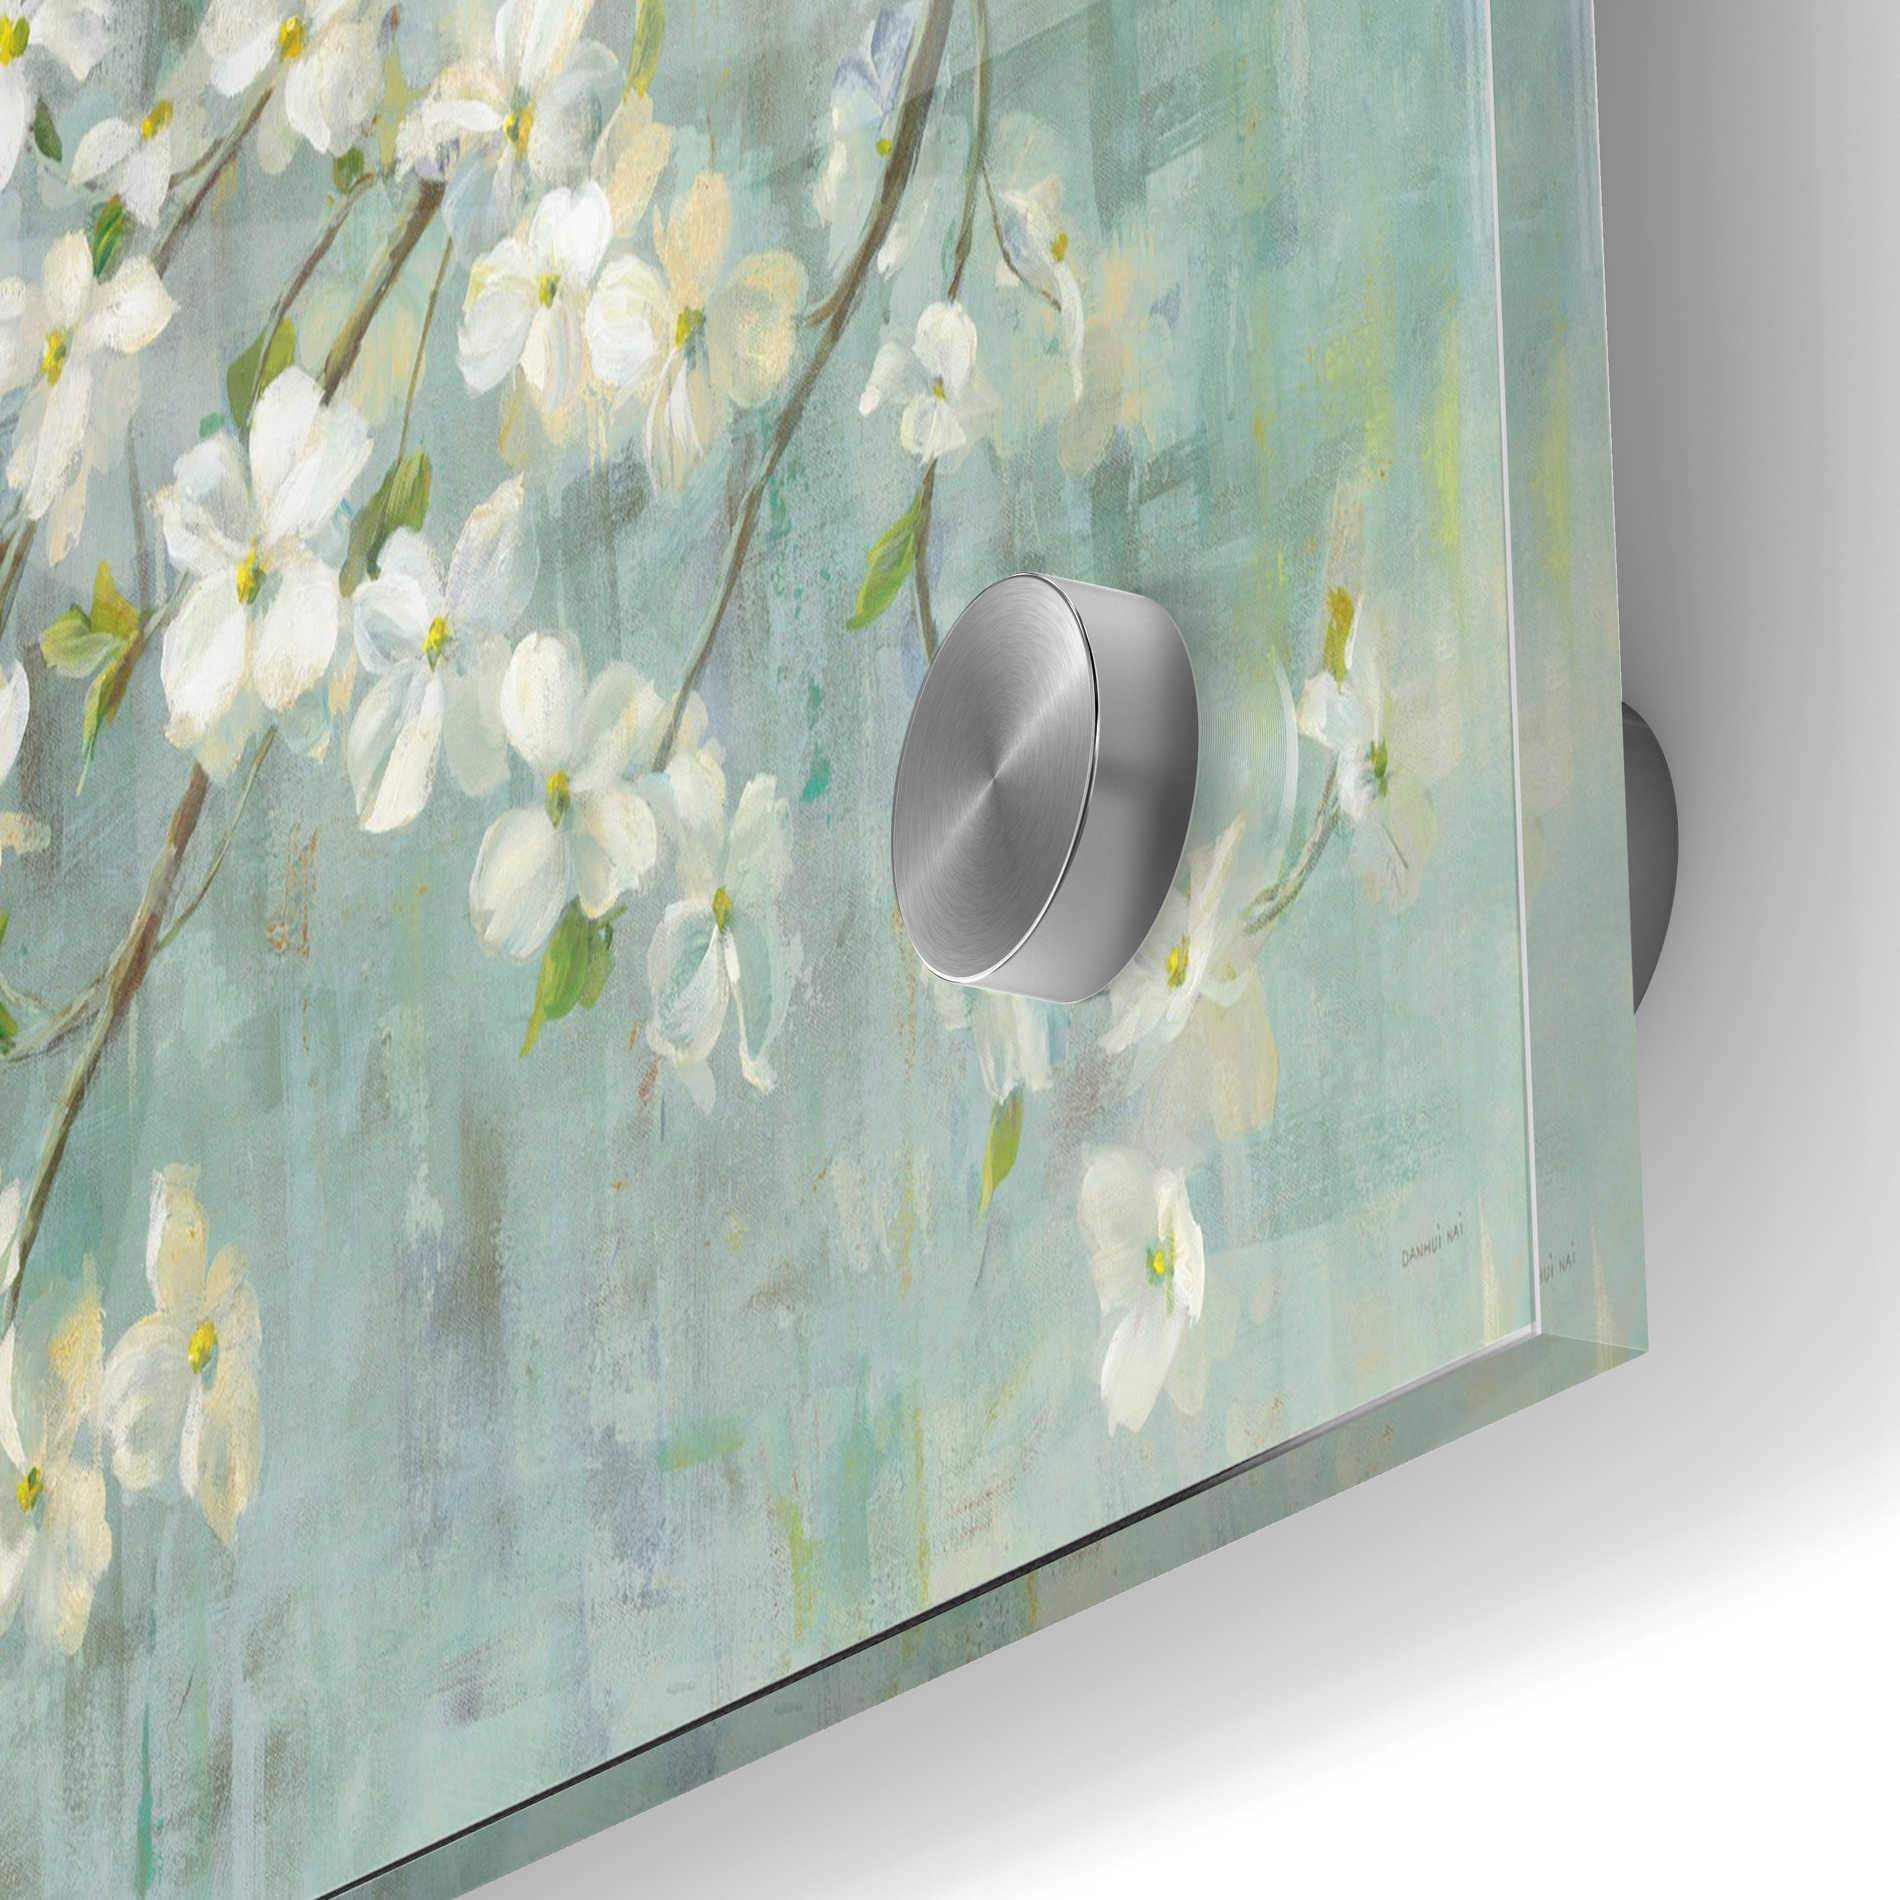 Epic Art 'Dogwood in Spring on Blue' by Danhui Nai, Acrylic Glass Wall Art,24x36